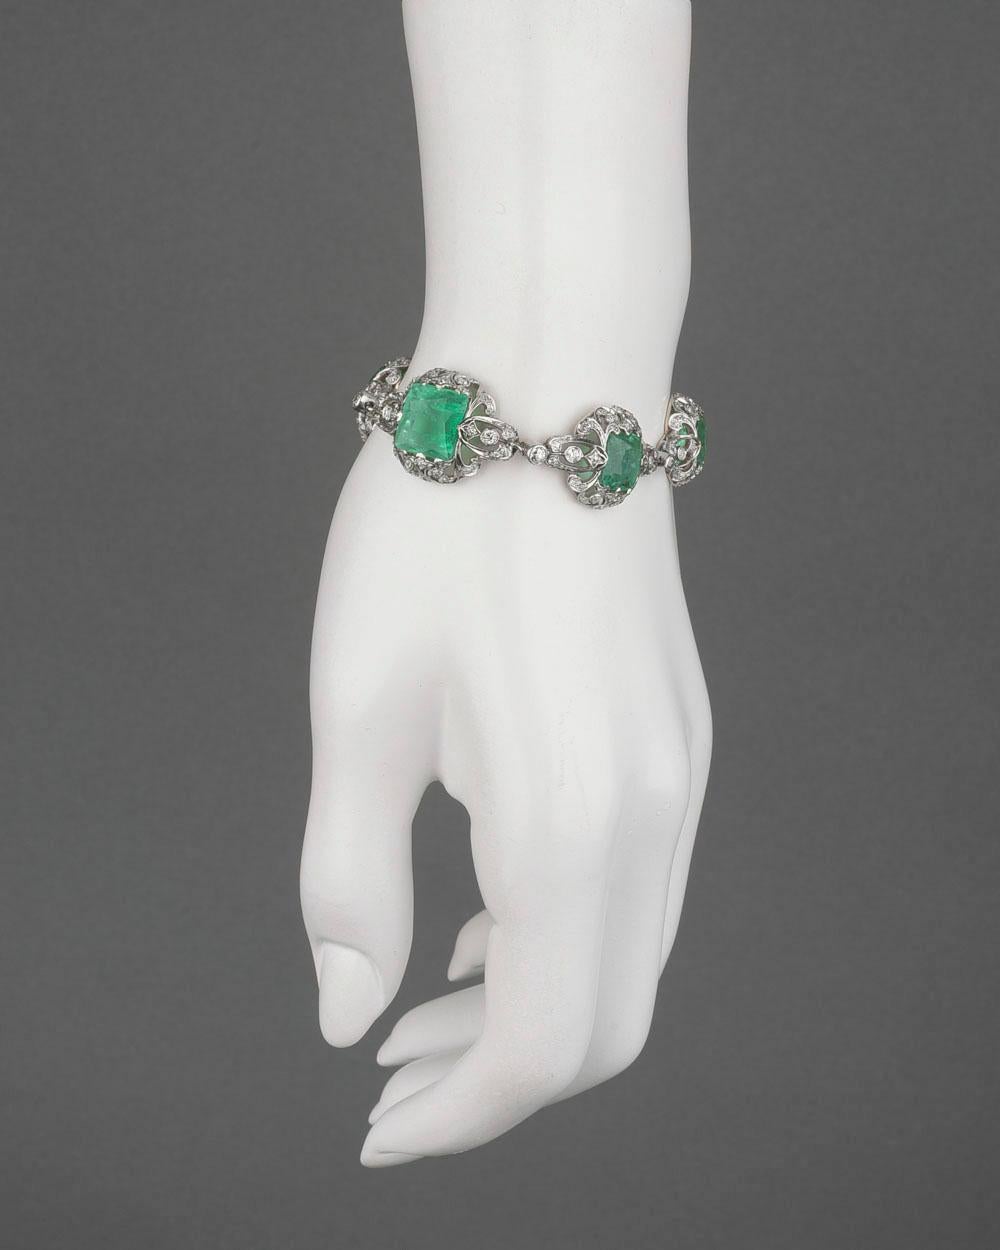 Antique emerald and diamond bracelet, set with six cushion-shaped emeralds of graduated size, the emeralds weighing approximately 20.37 total carats, accented by circular-cut diamonds weighing approximately 3.95 total carats, in a fine pierced